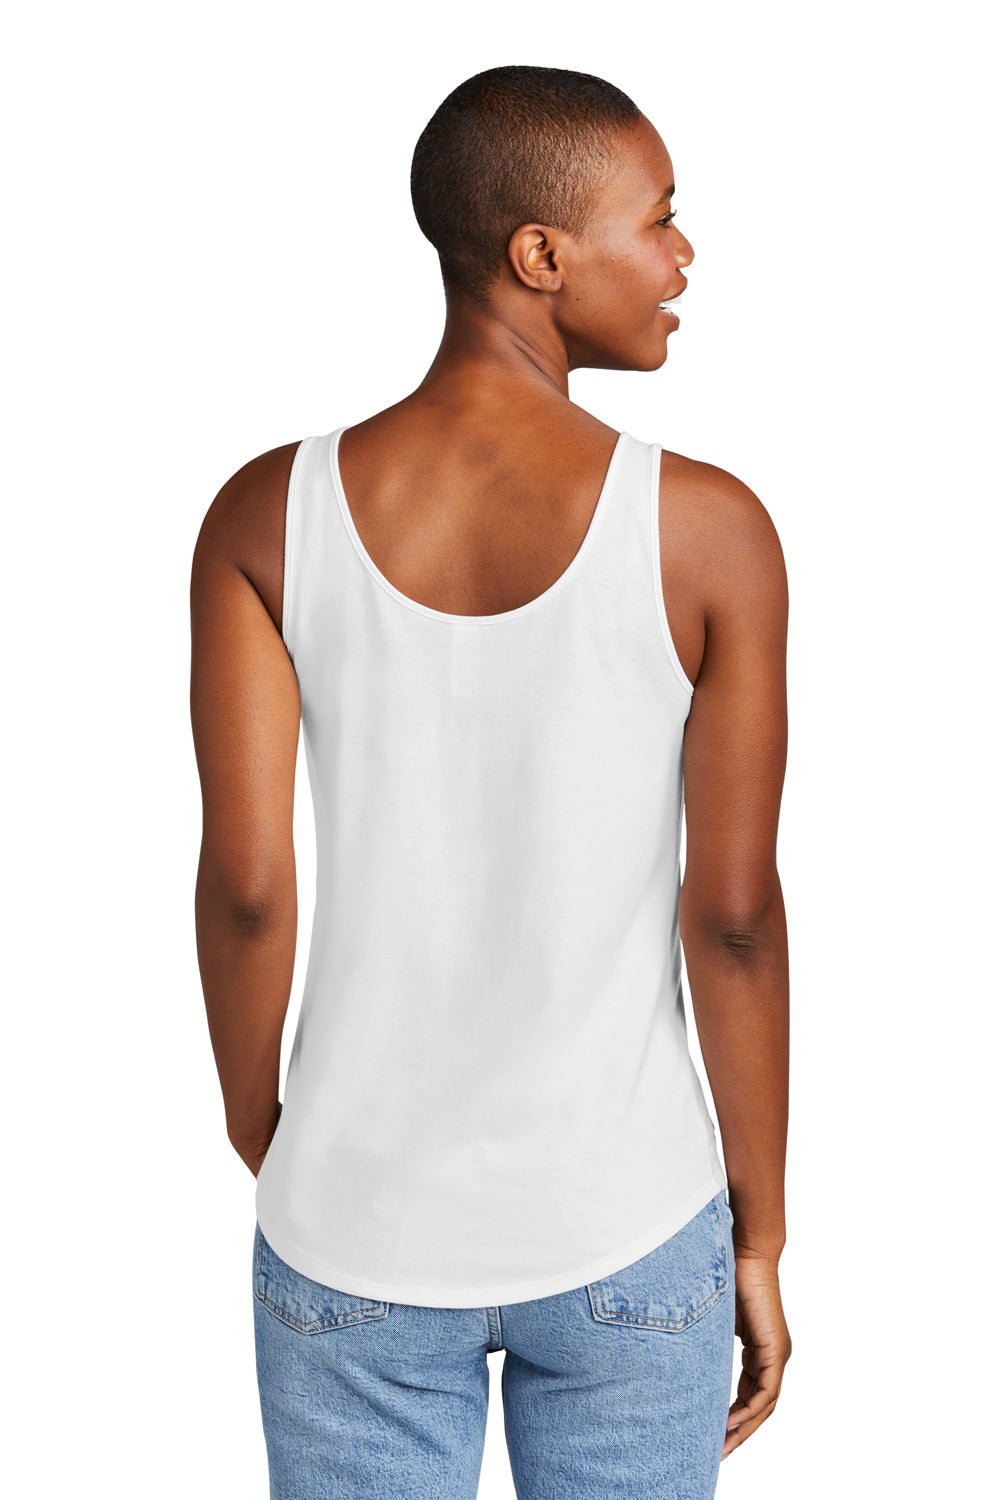 District DT151 Womens Perfect Tri Relaxed Tank Top White Back